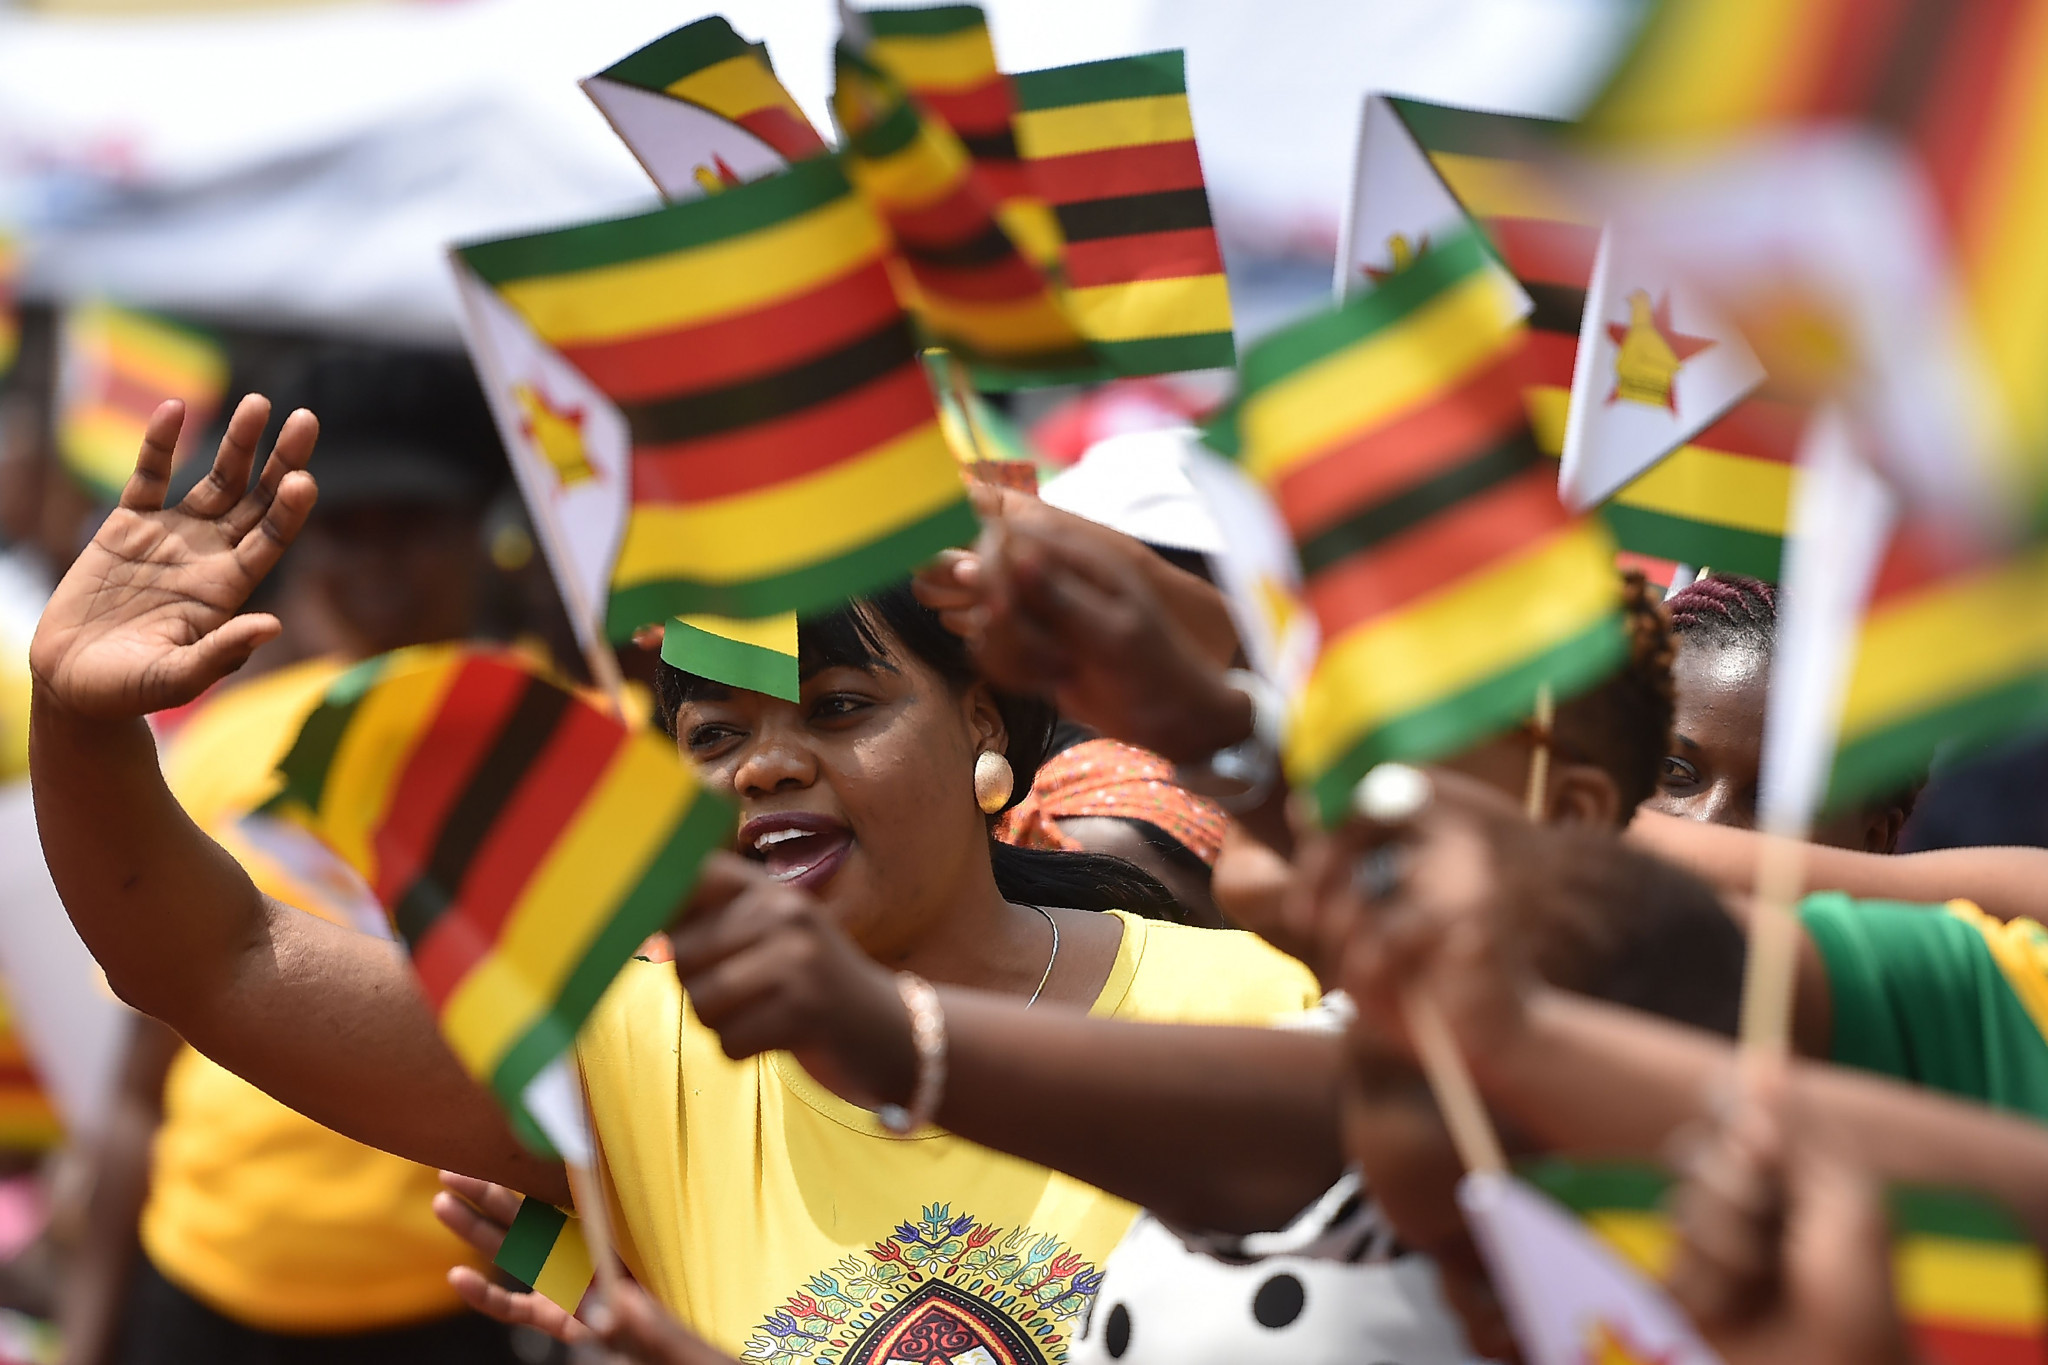 Talks have already started about Zimbabwe rejoining the Commonwealth after a 15-year absence ©Getty Images